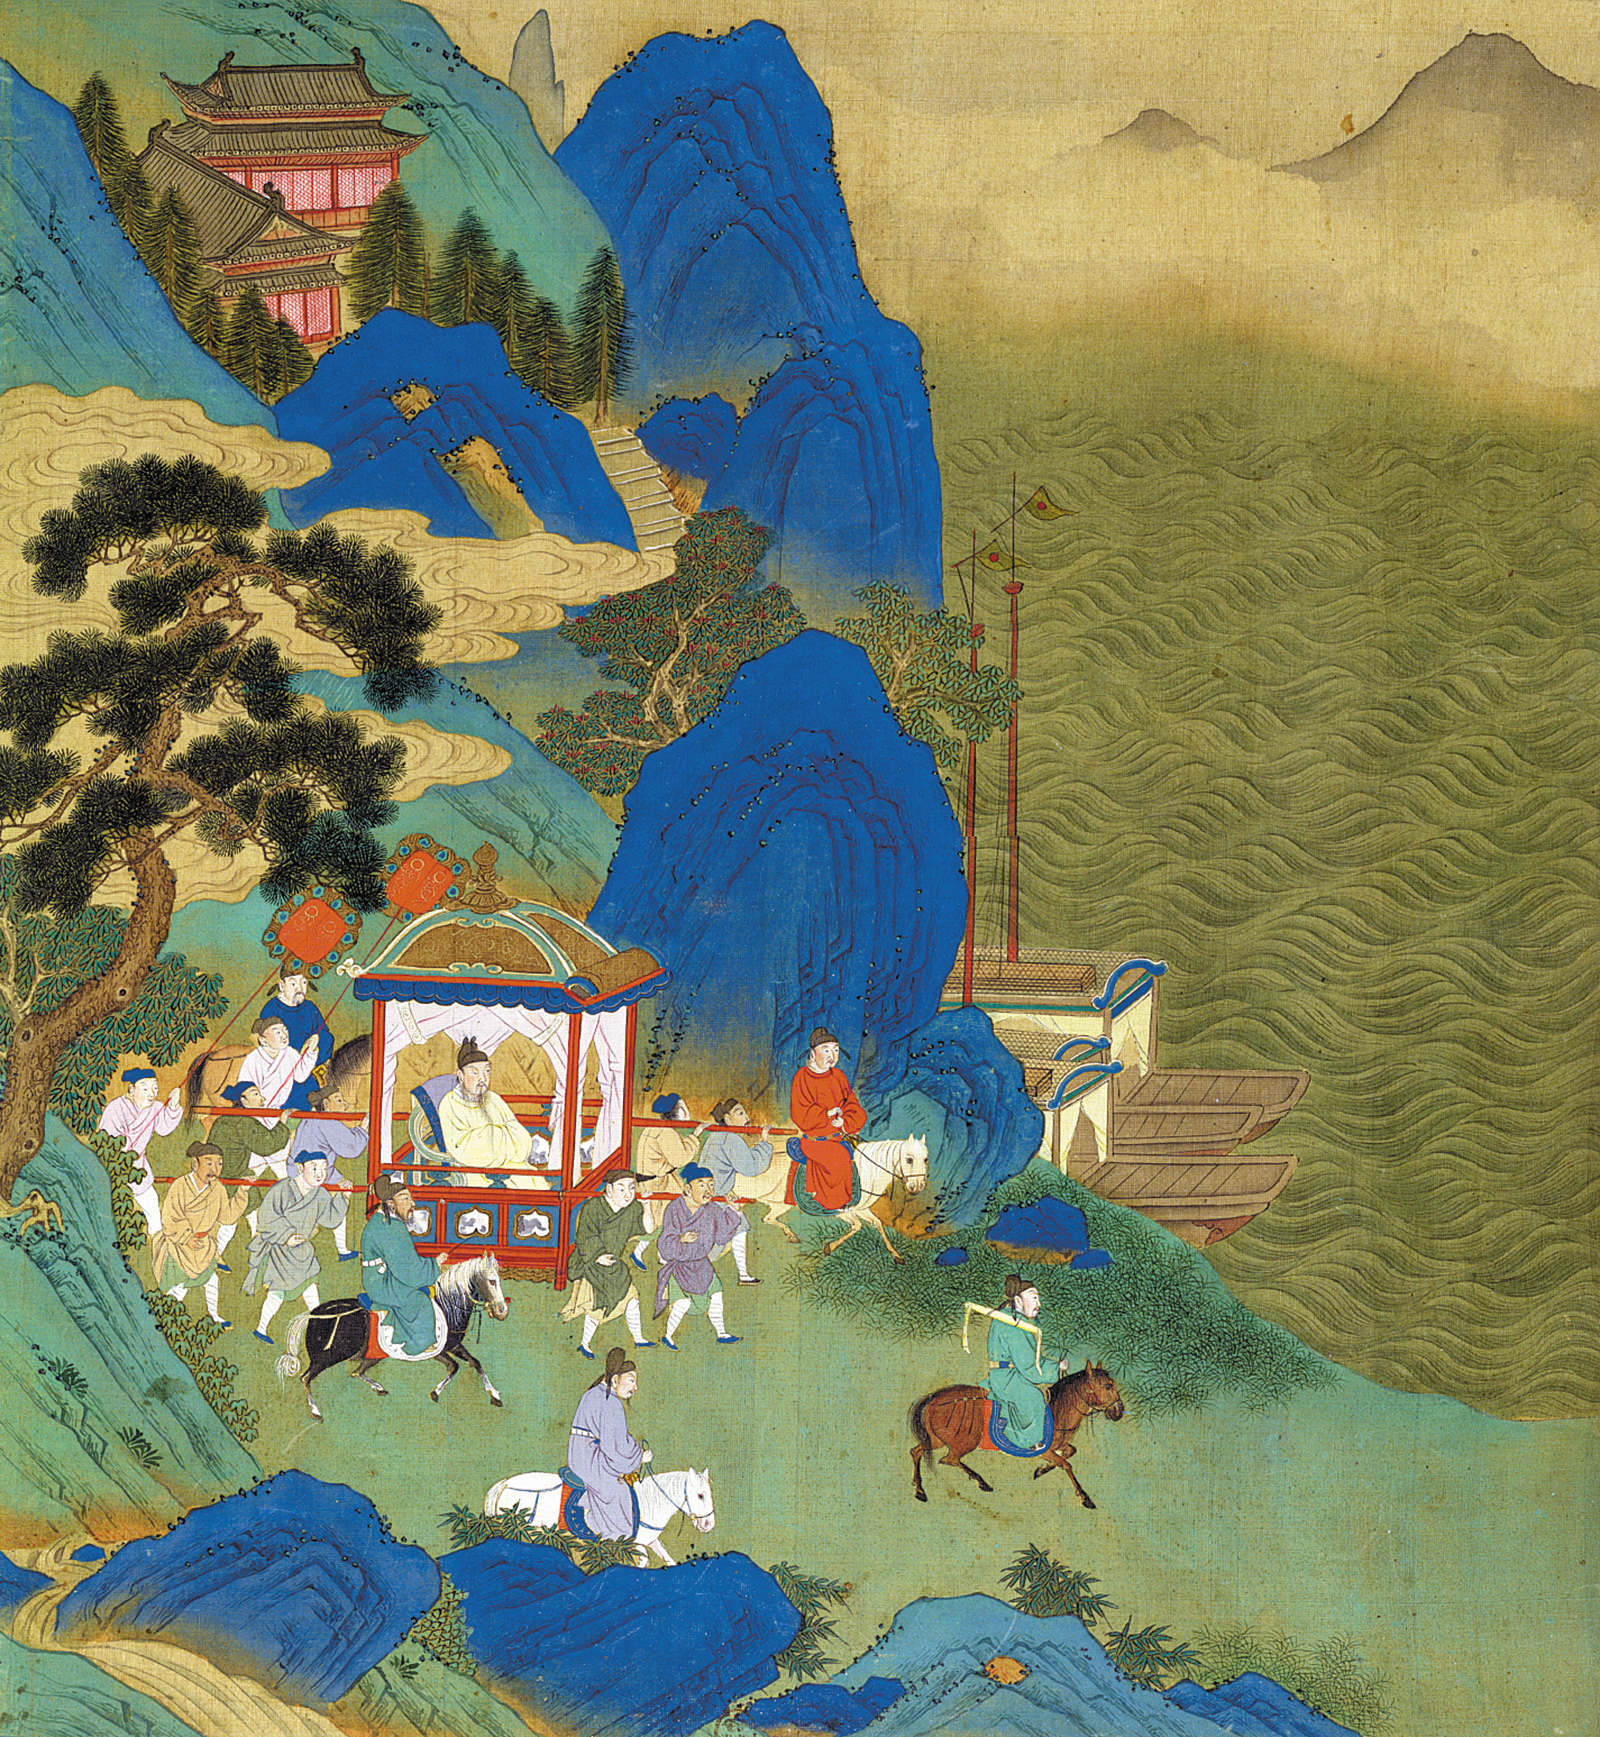 ‘Emperor Qin Shi Huang traveling in a palanquin,’ late third century BCE; eighteenth-century painting from The History of the Lives of the Chinese Emperors